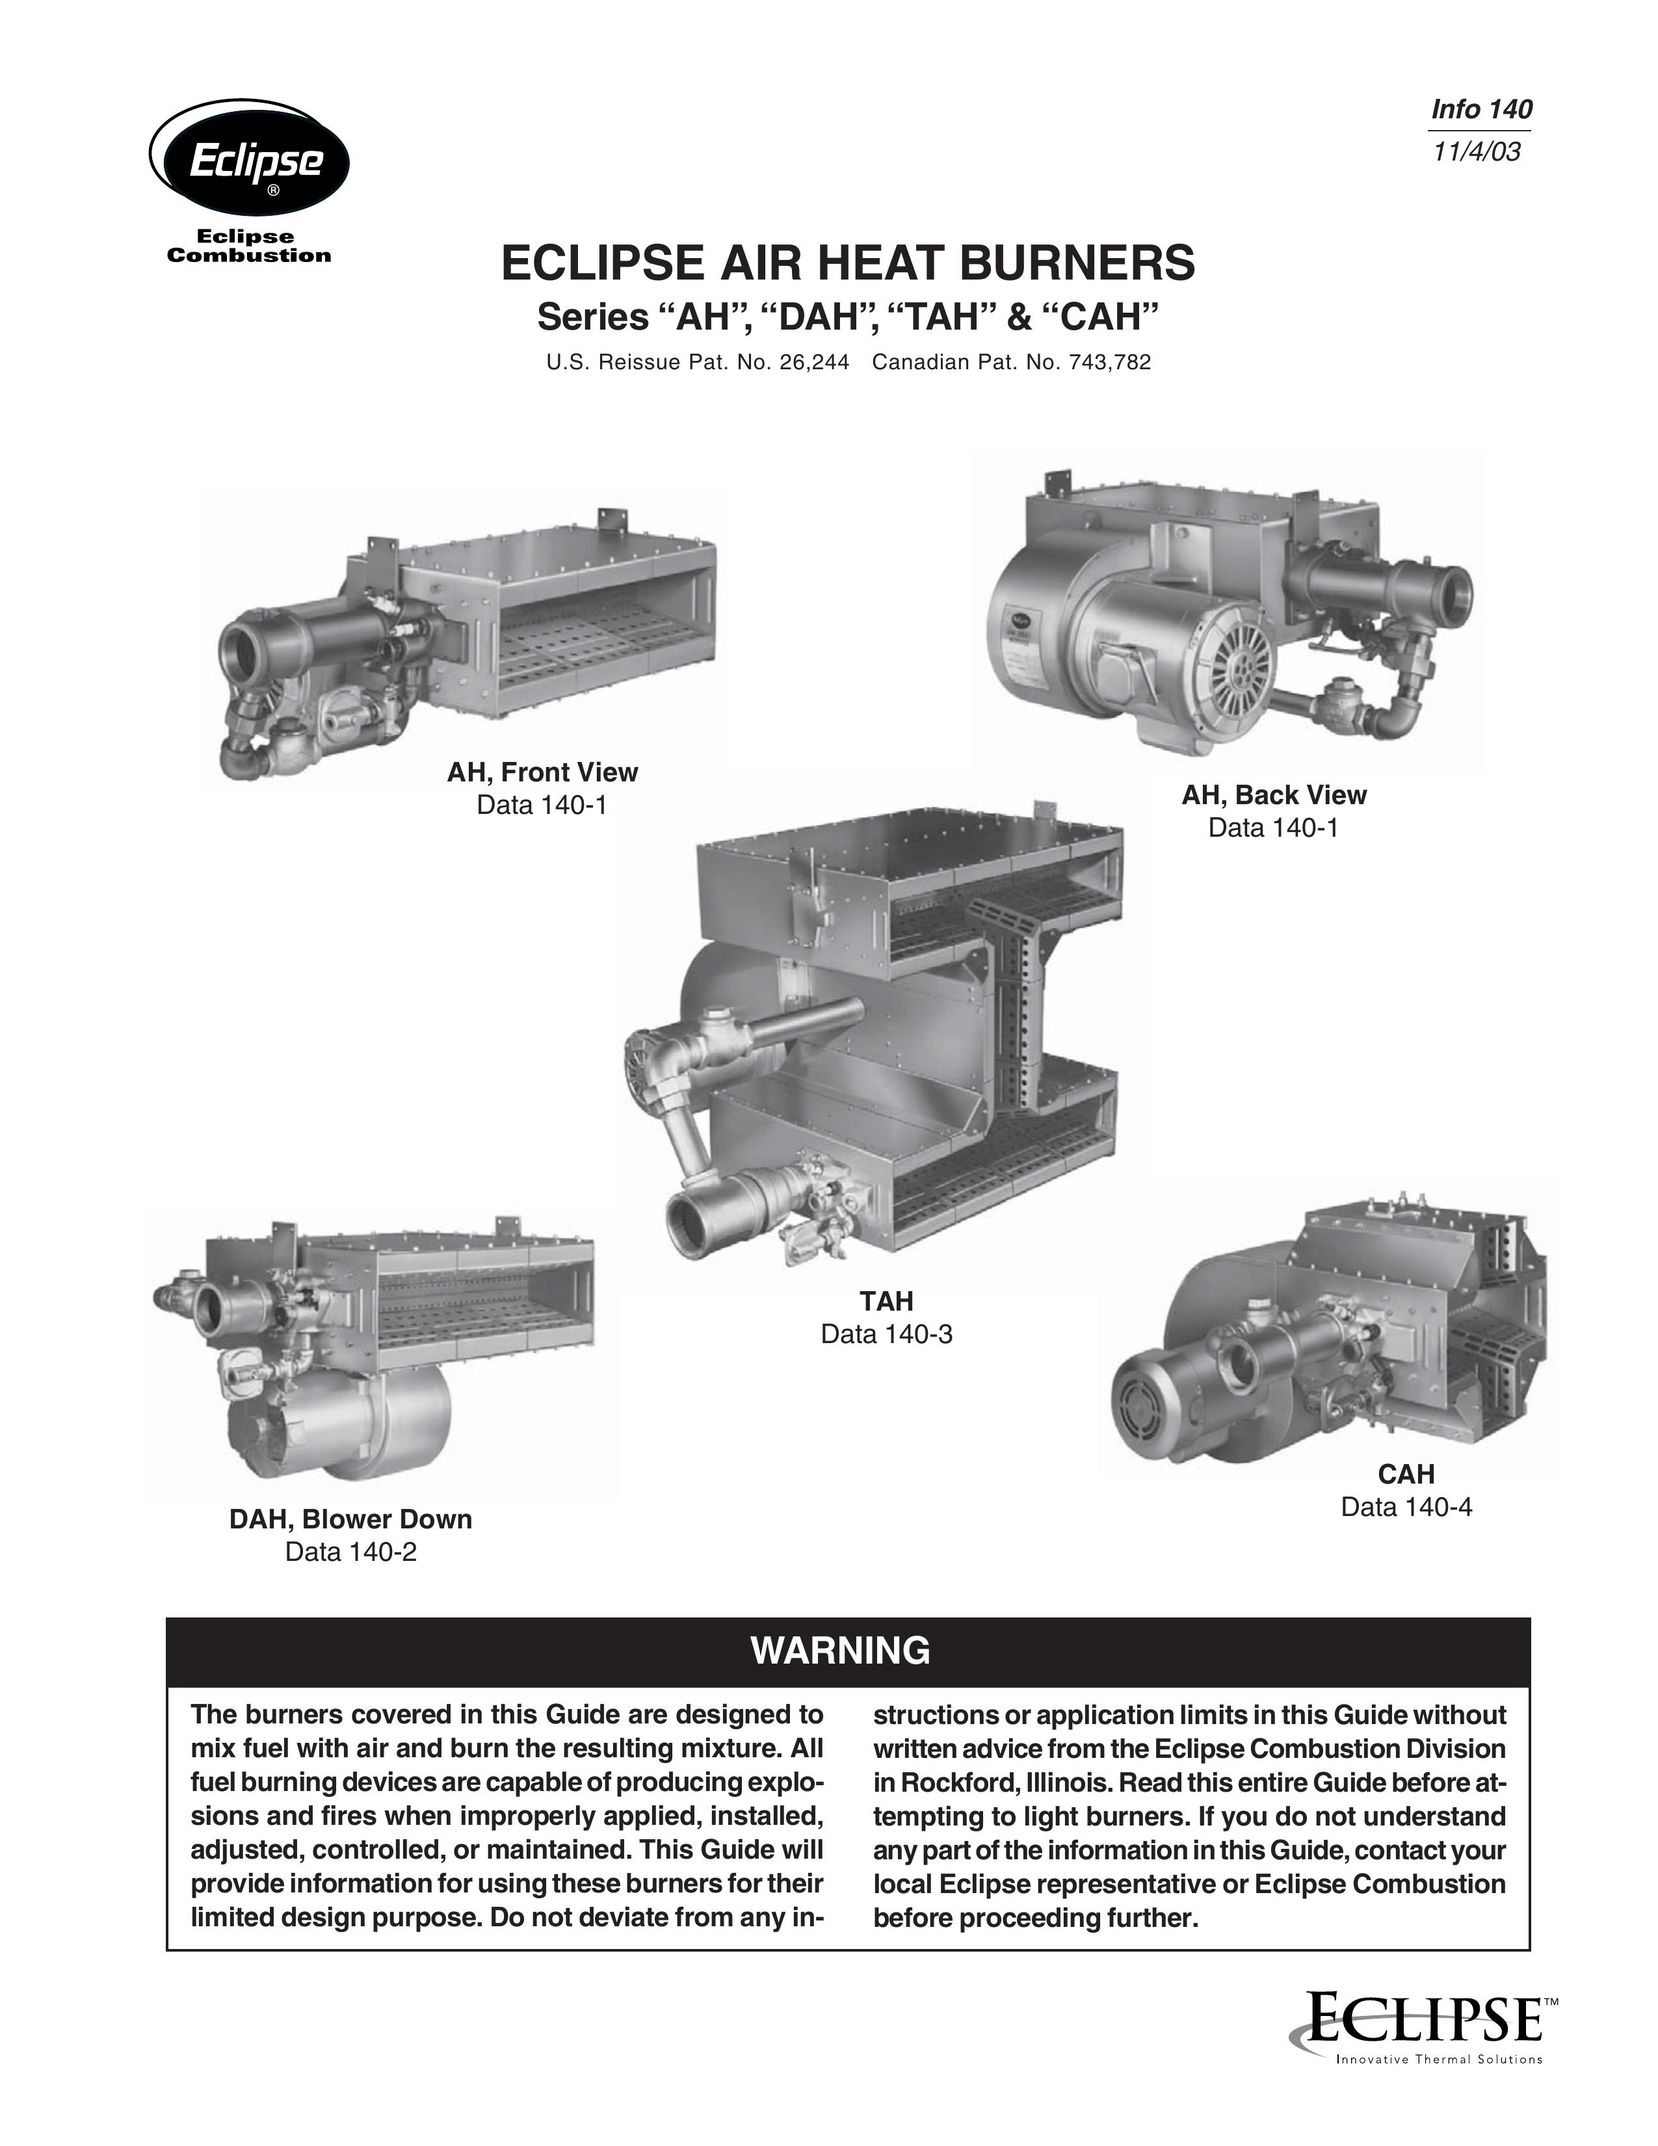 Eclipse Combustion CAH Air Conditioner User Manual